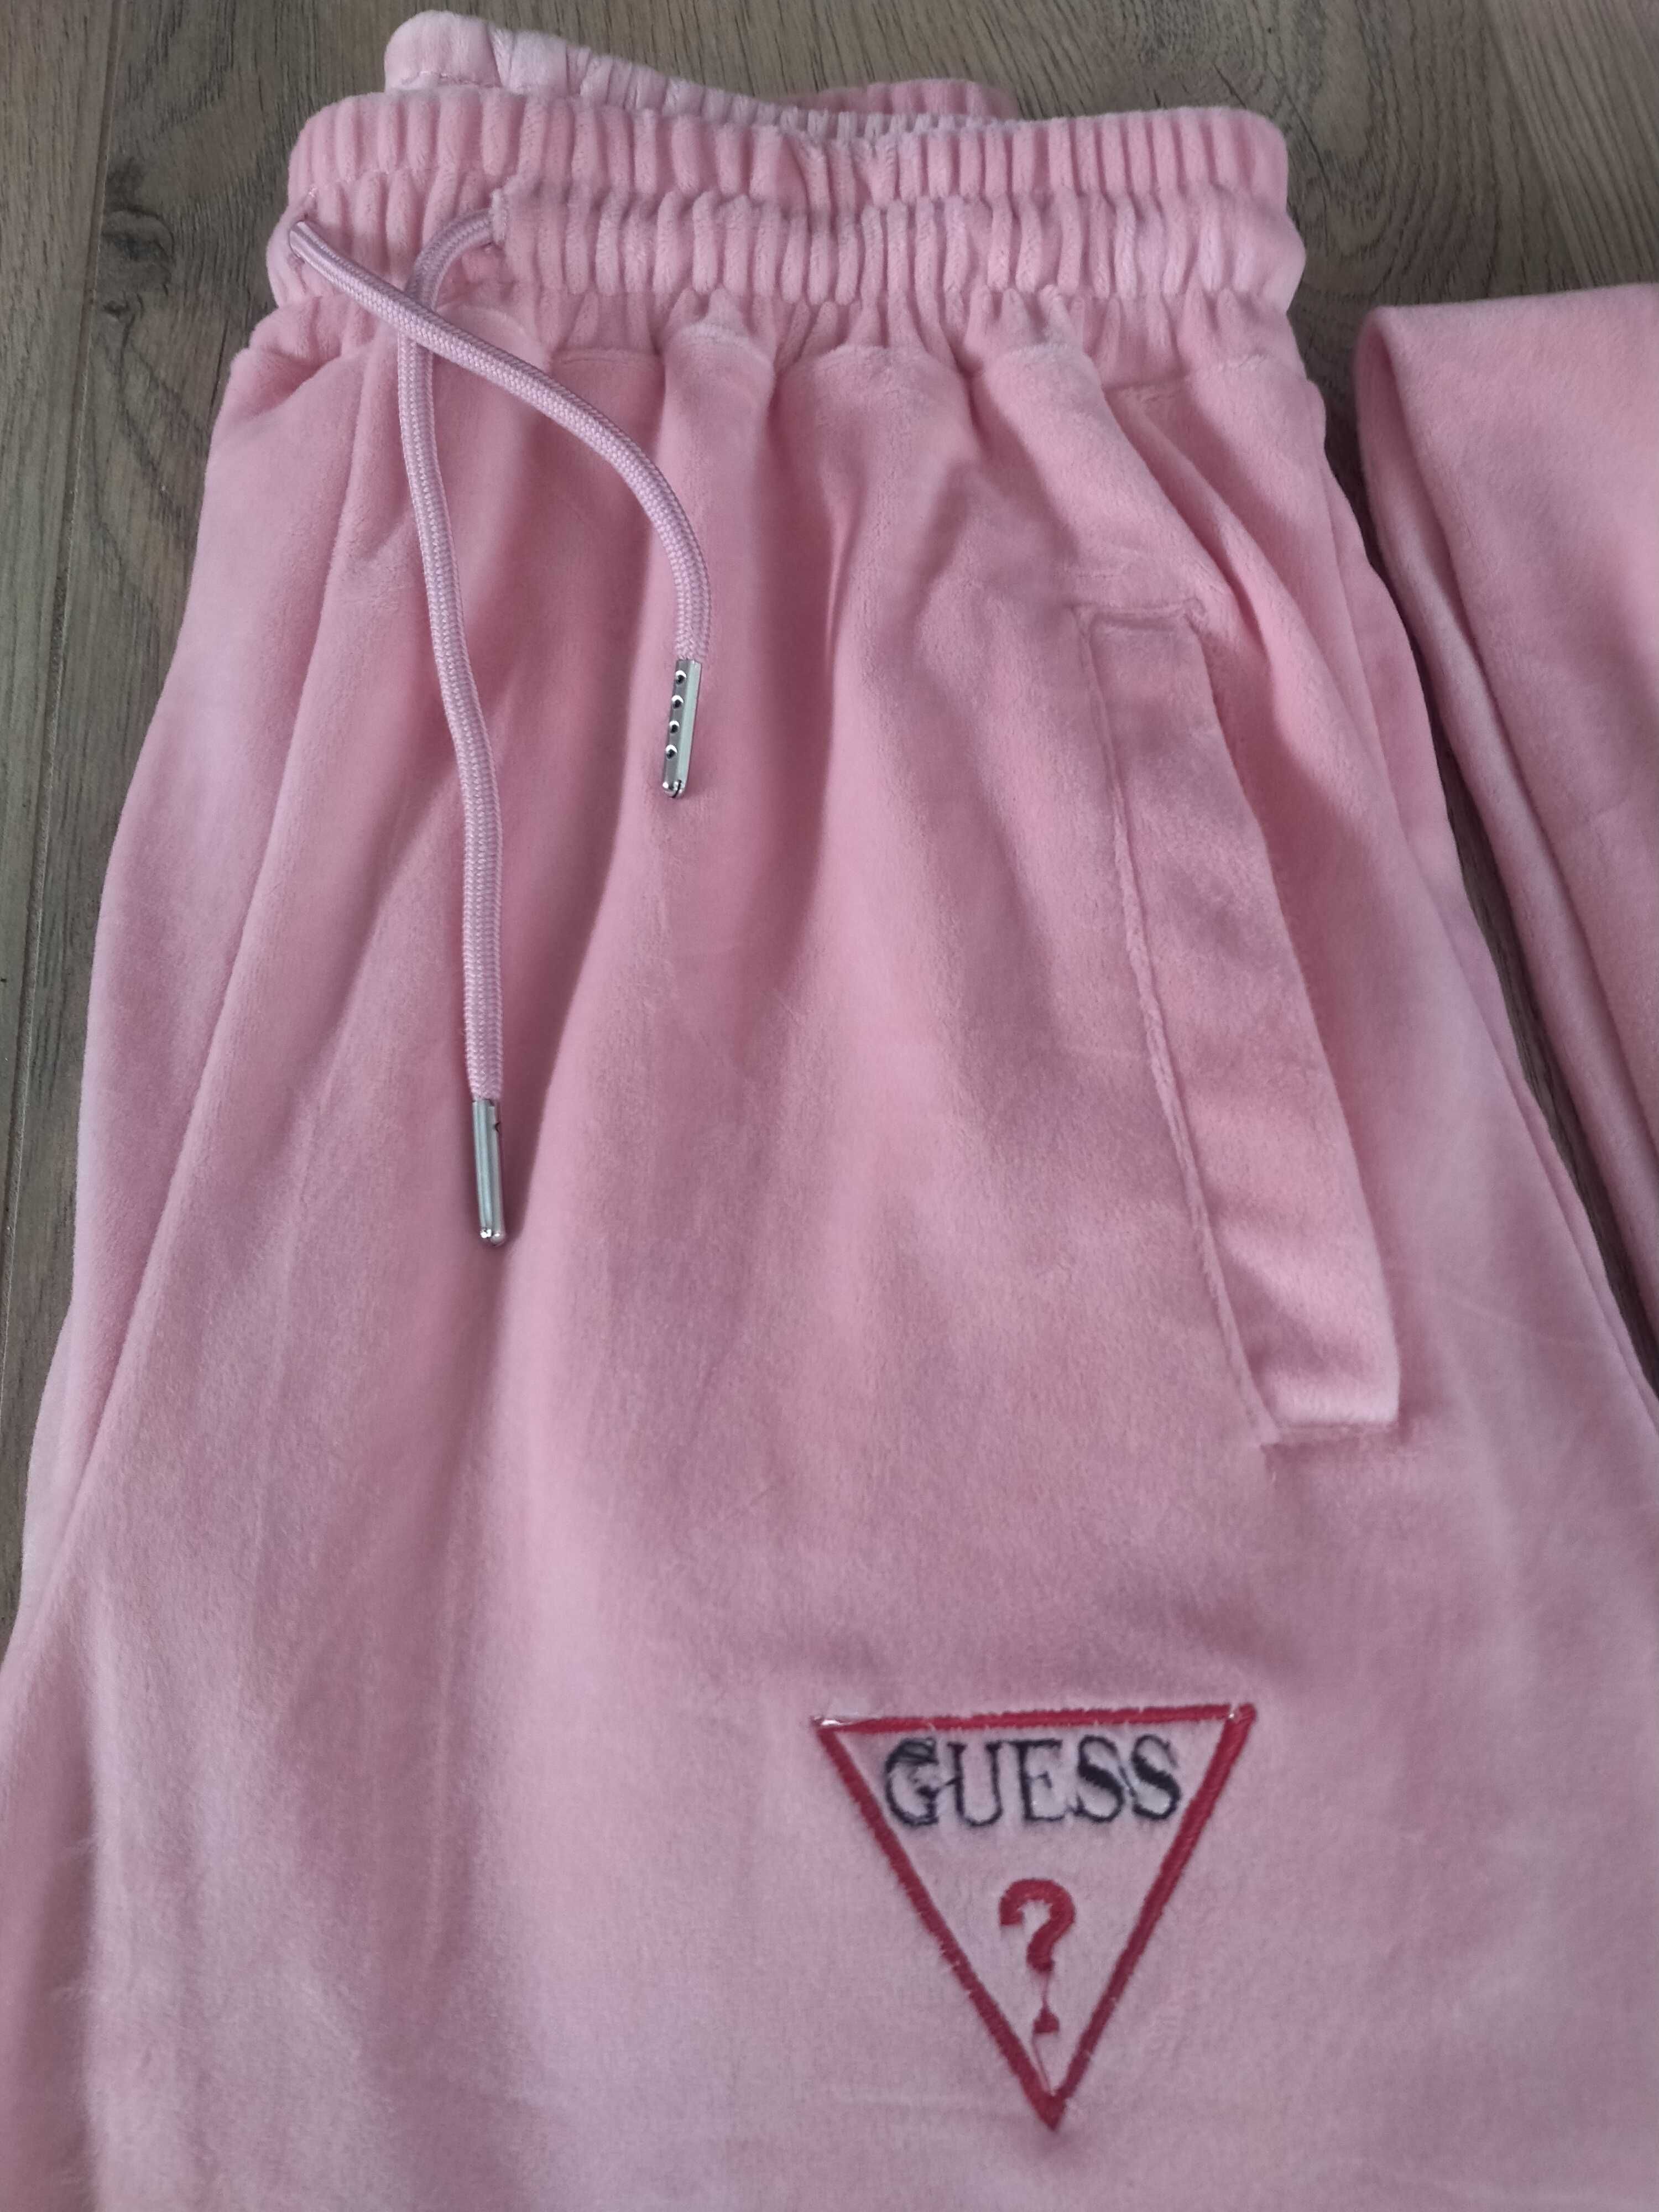 Dres komplet welurowy Guess nowy